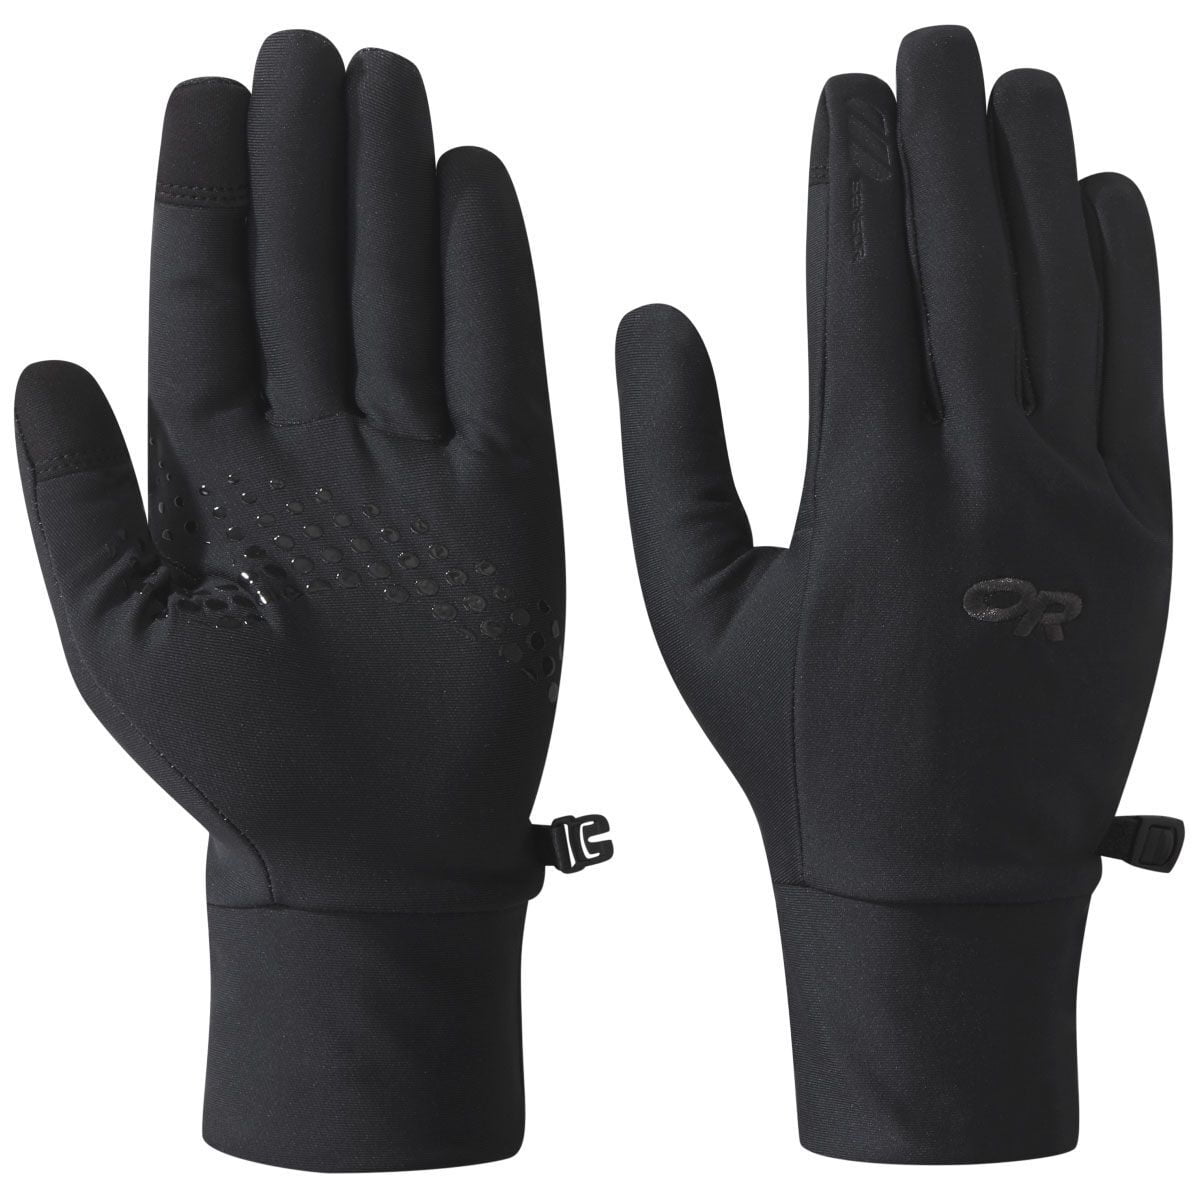 the men&#39;s vigor lightweight sensor glove in black as a pair showing the front and back